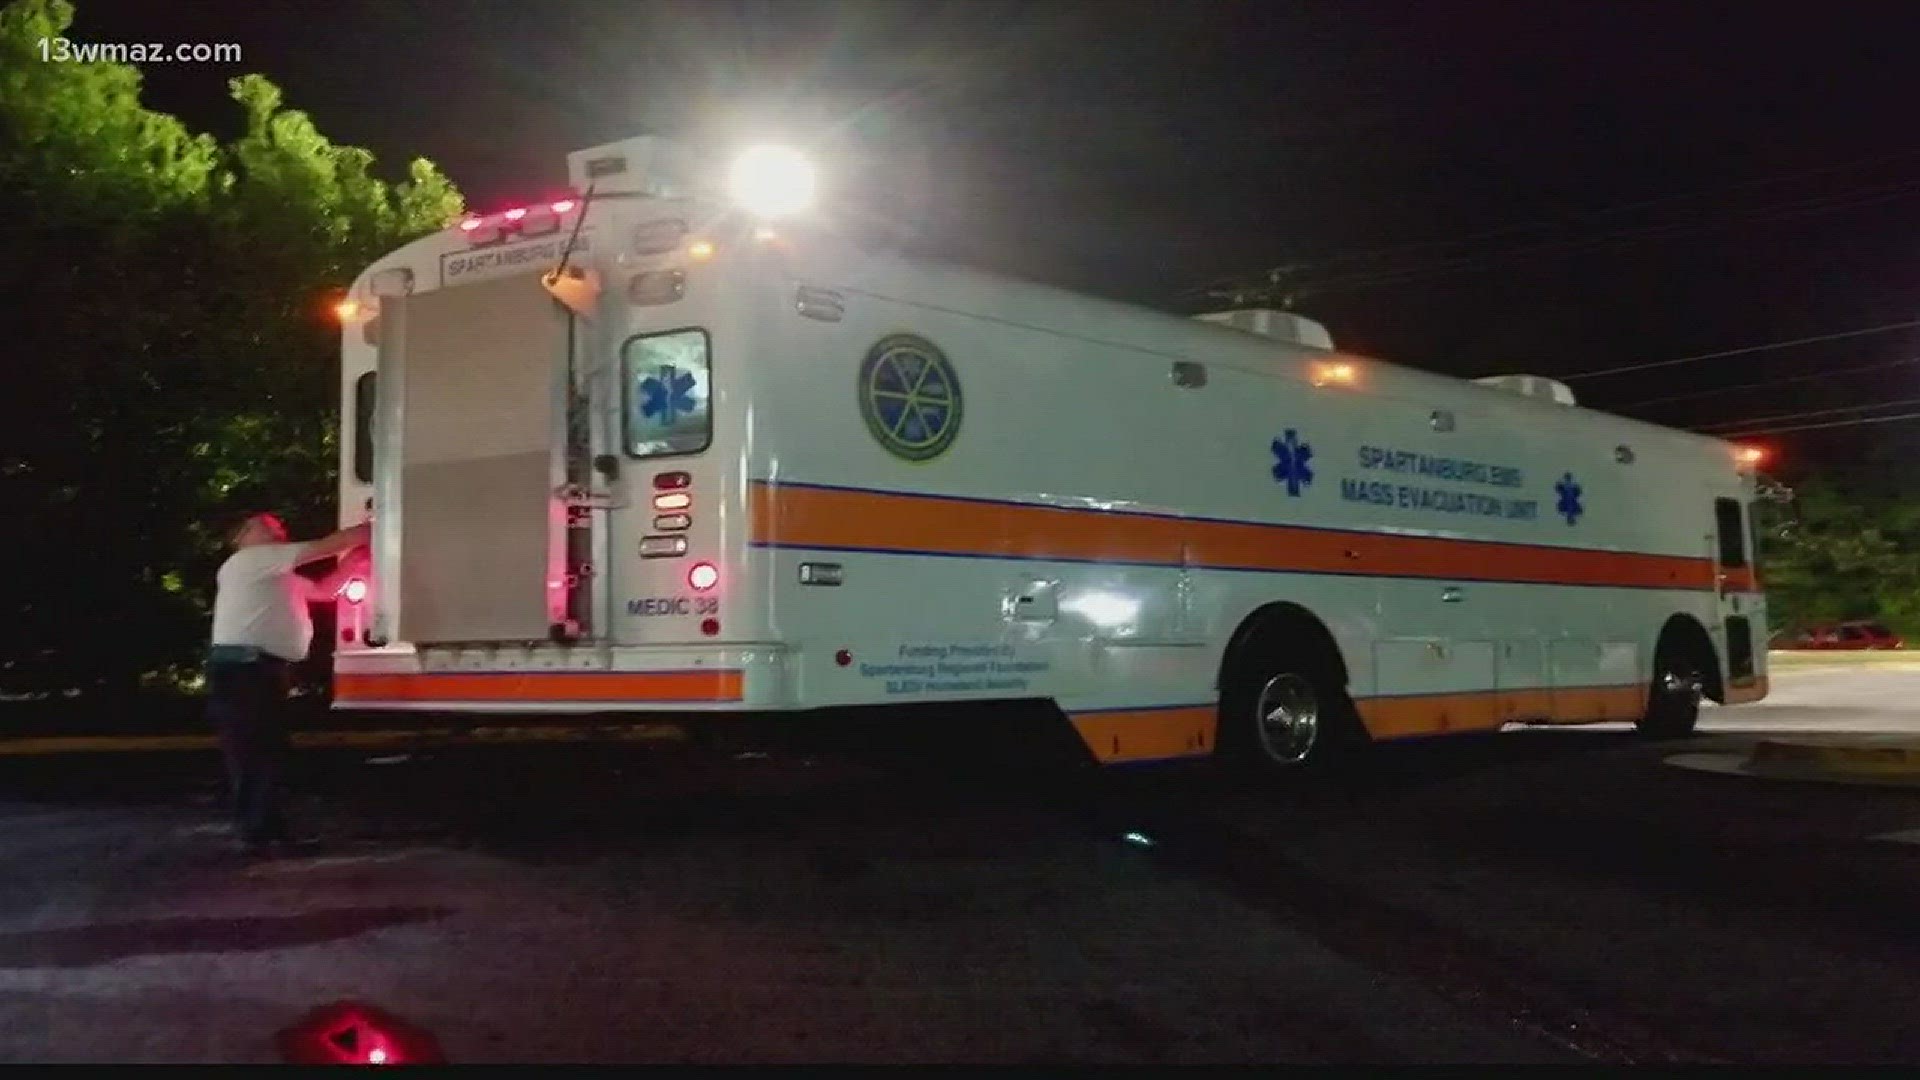 Local hospitals taking in evacuating patients